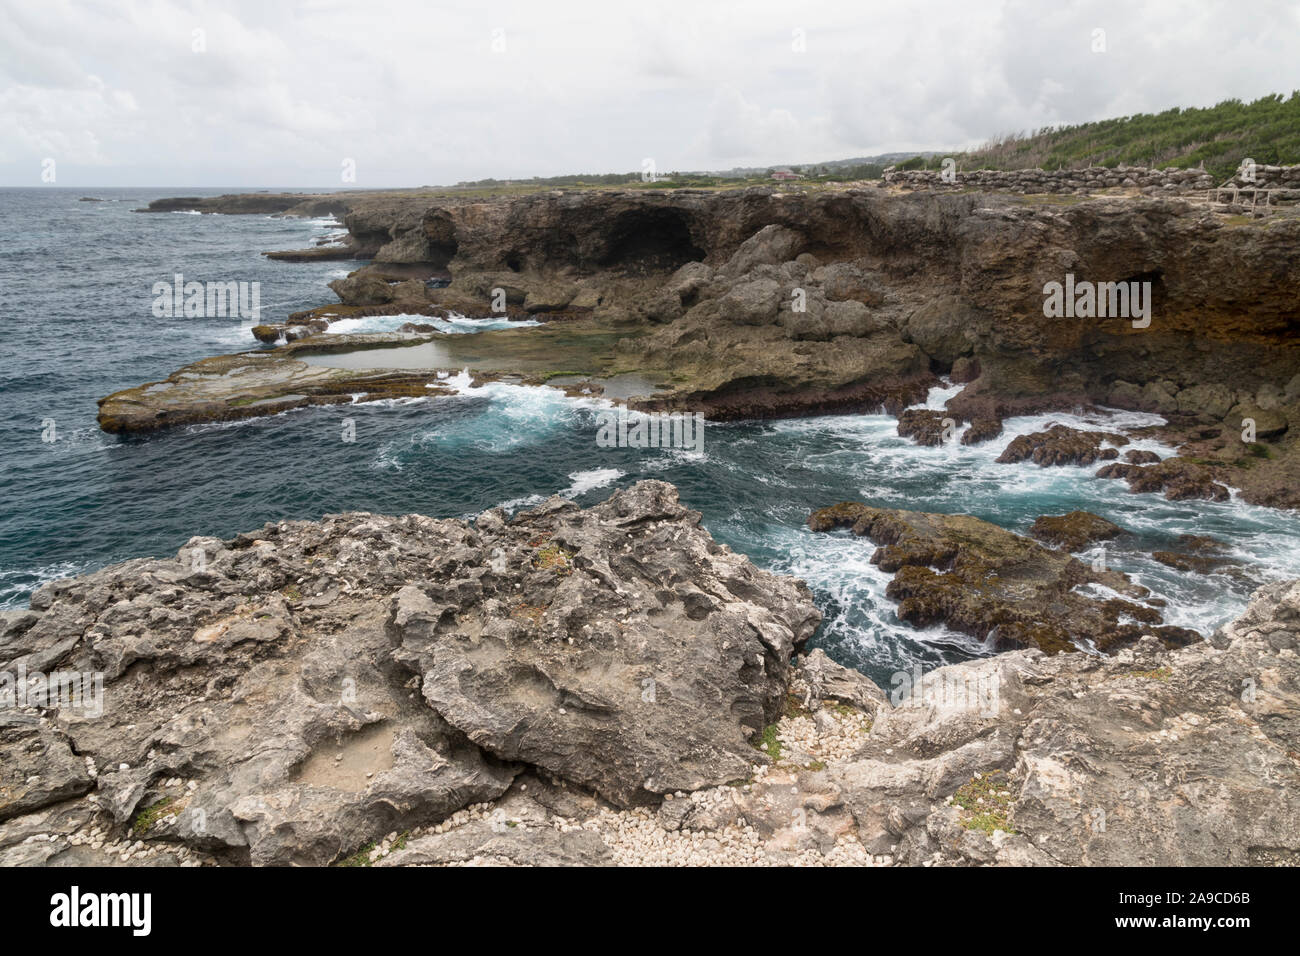 Rugged coastline at North Point on the Caribbean island of Barbados Stock Photo